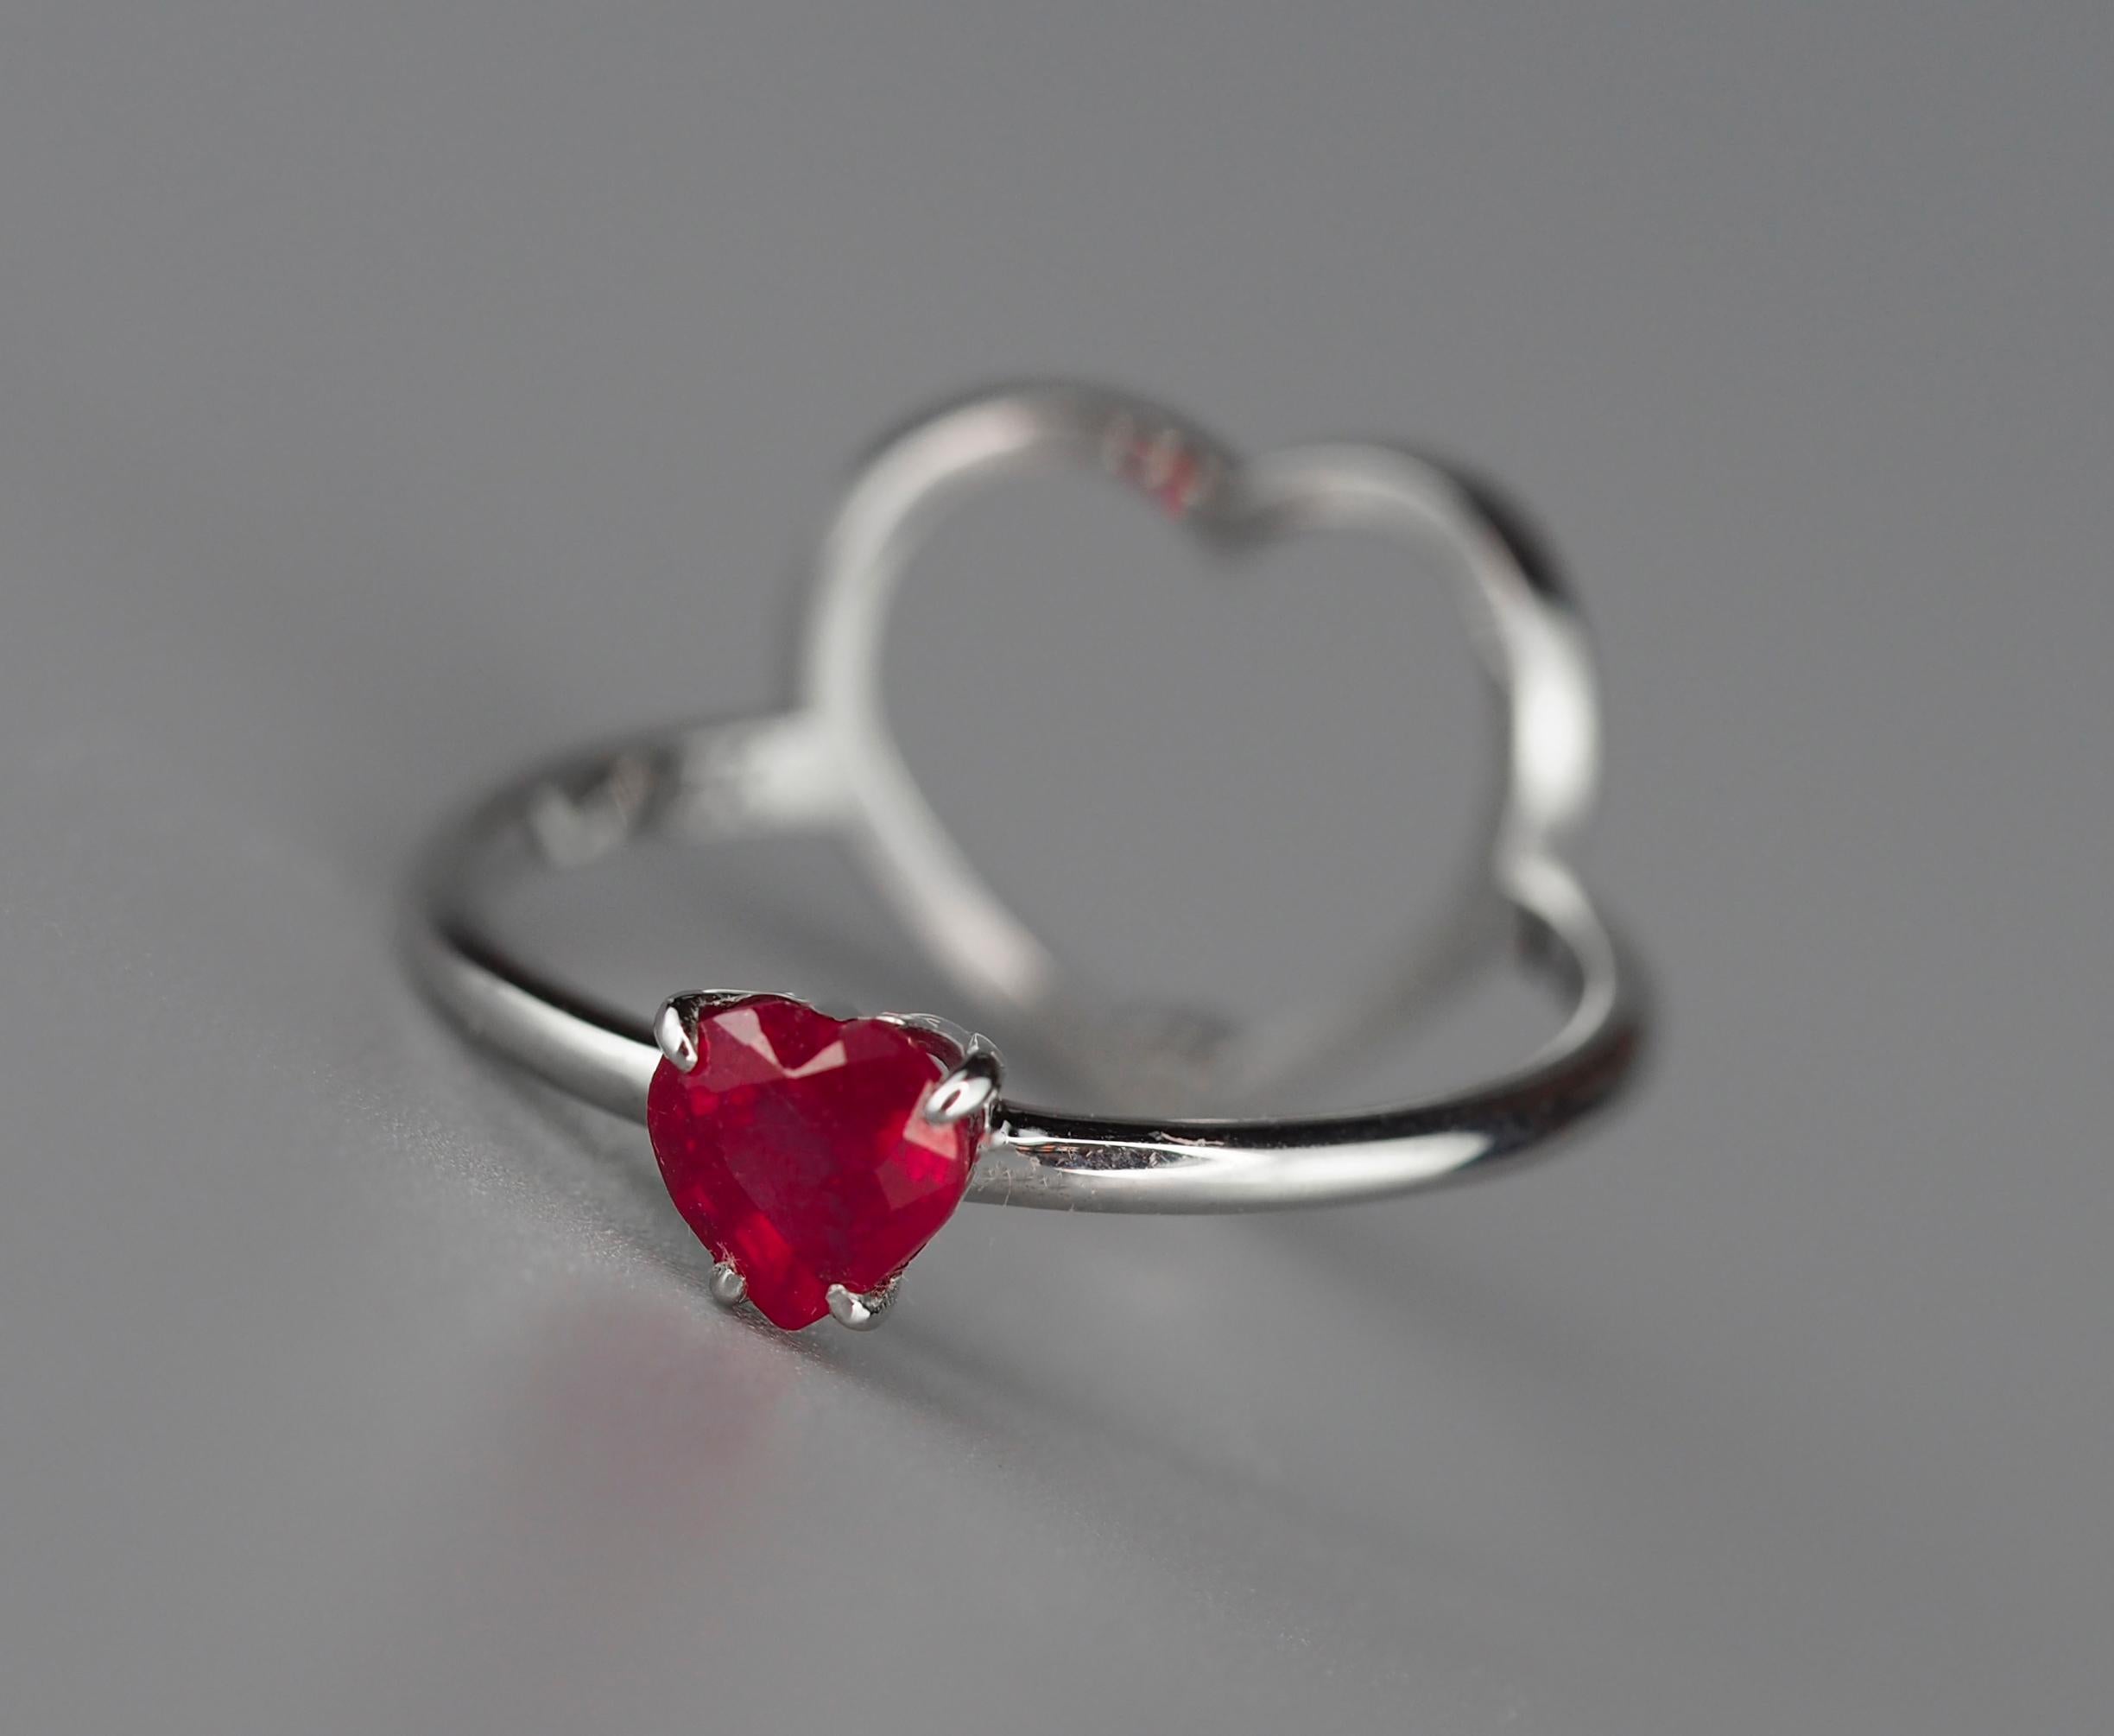 For Sale:  14k Gold Ring with Heart Ruby and Diamonds. July birthstone ruby ring 8